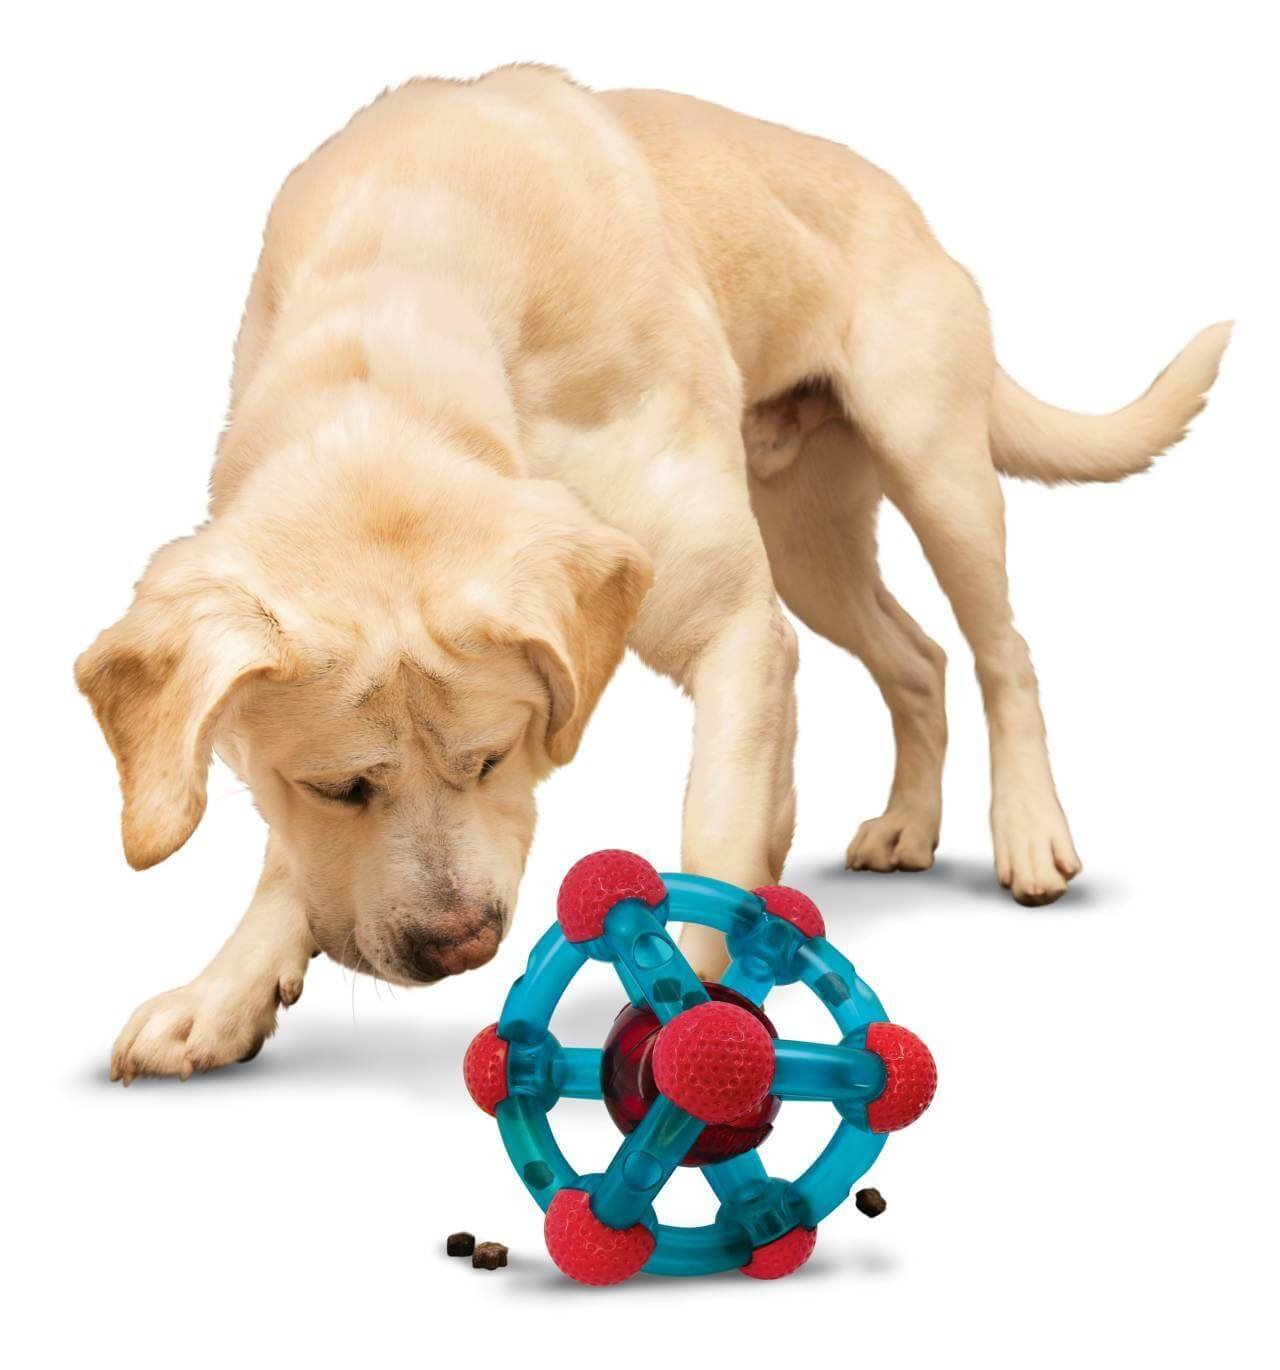 Treat dispensing dog toys are great for keeping your pup entertained and mentally stimulated